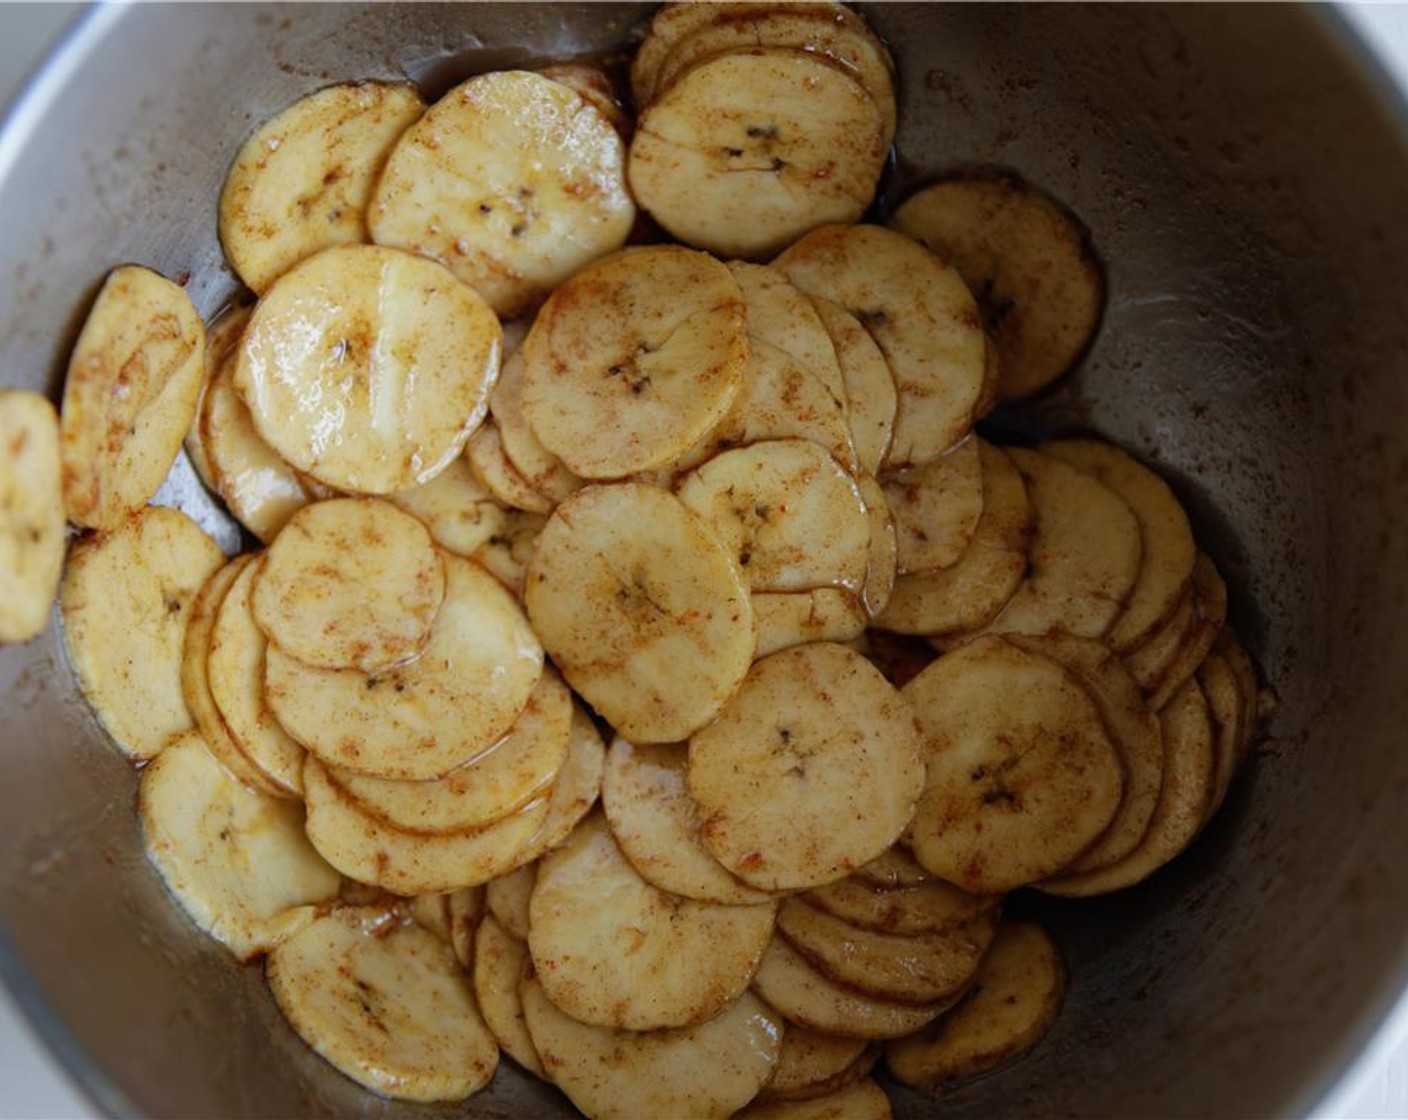 step 6 Place the sliced plantain in a bowl with the Coconut Oil (2 Tbsp), Maple Syrup (1 Tbsp), Salt (1/2 tsp), Ground Cinnamon (1/2 tsp), and Cayenne Pepper (1/4 tsp). Use your hands to separate the slices and ensure they are evenly coated.